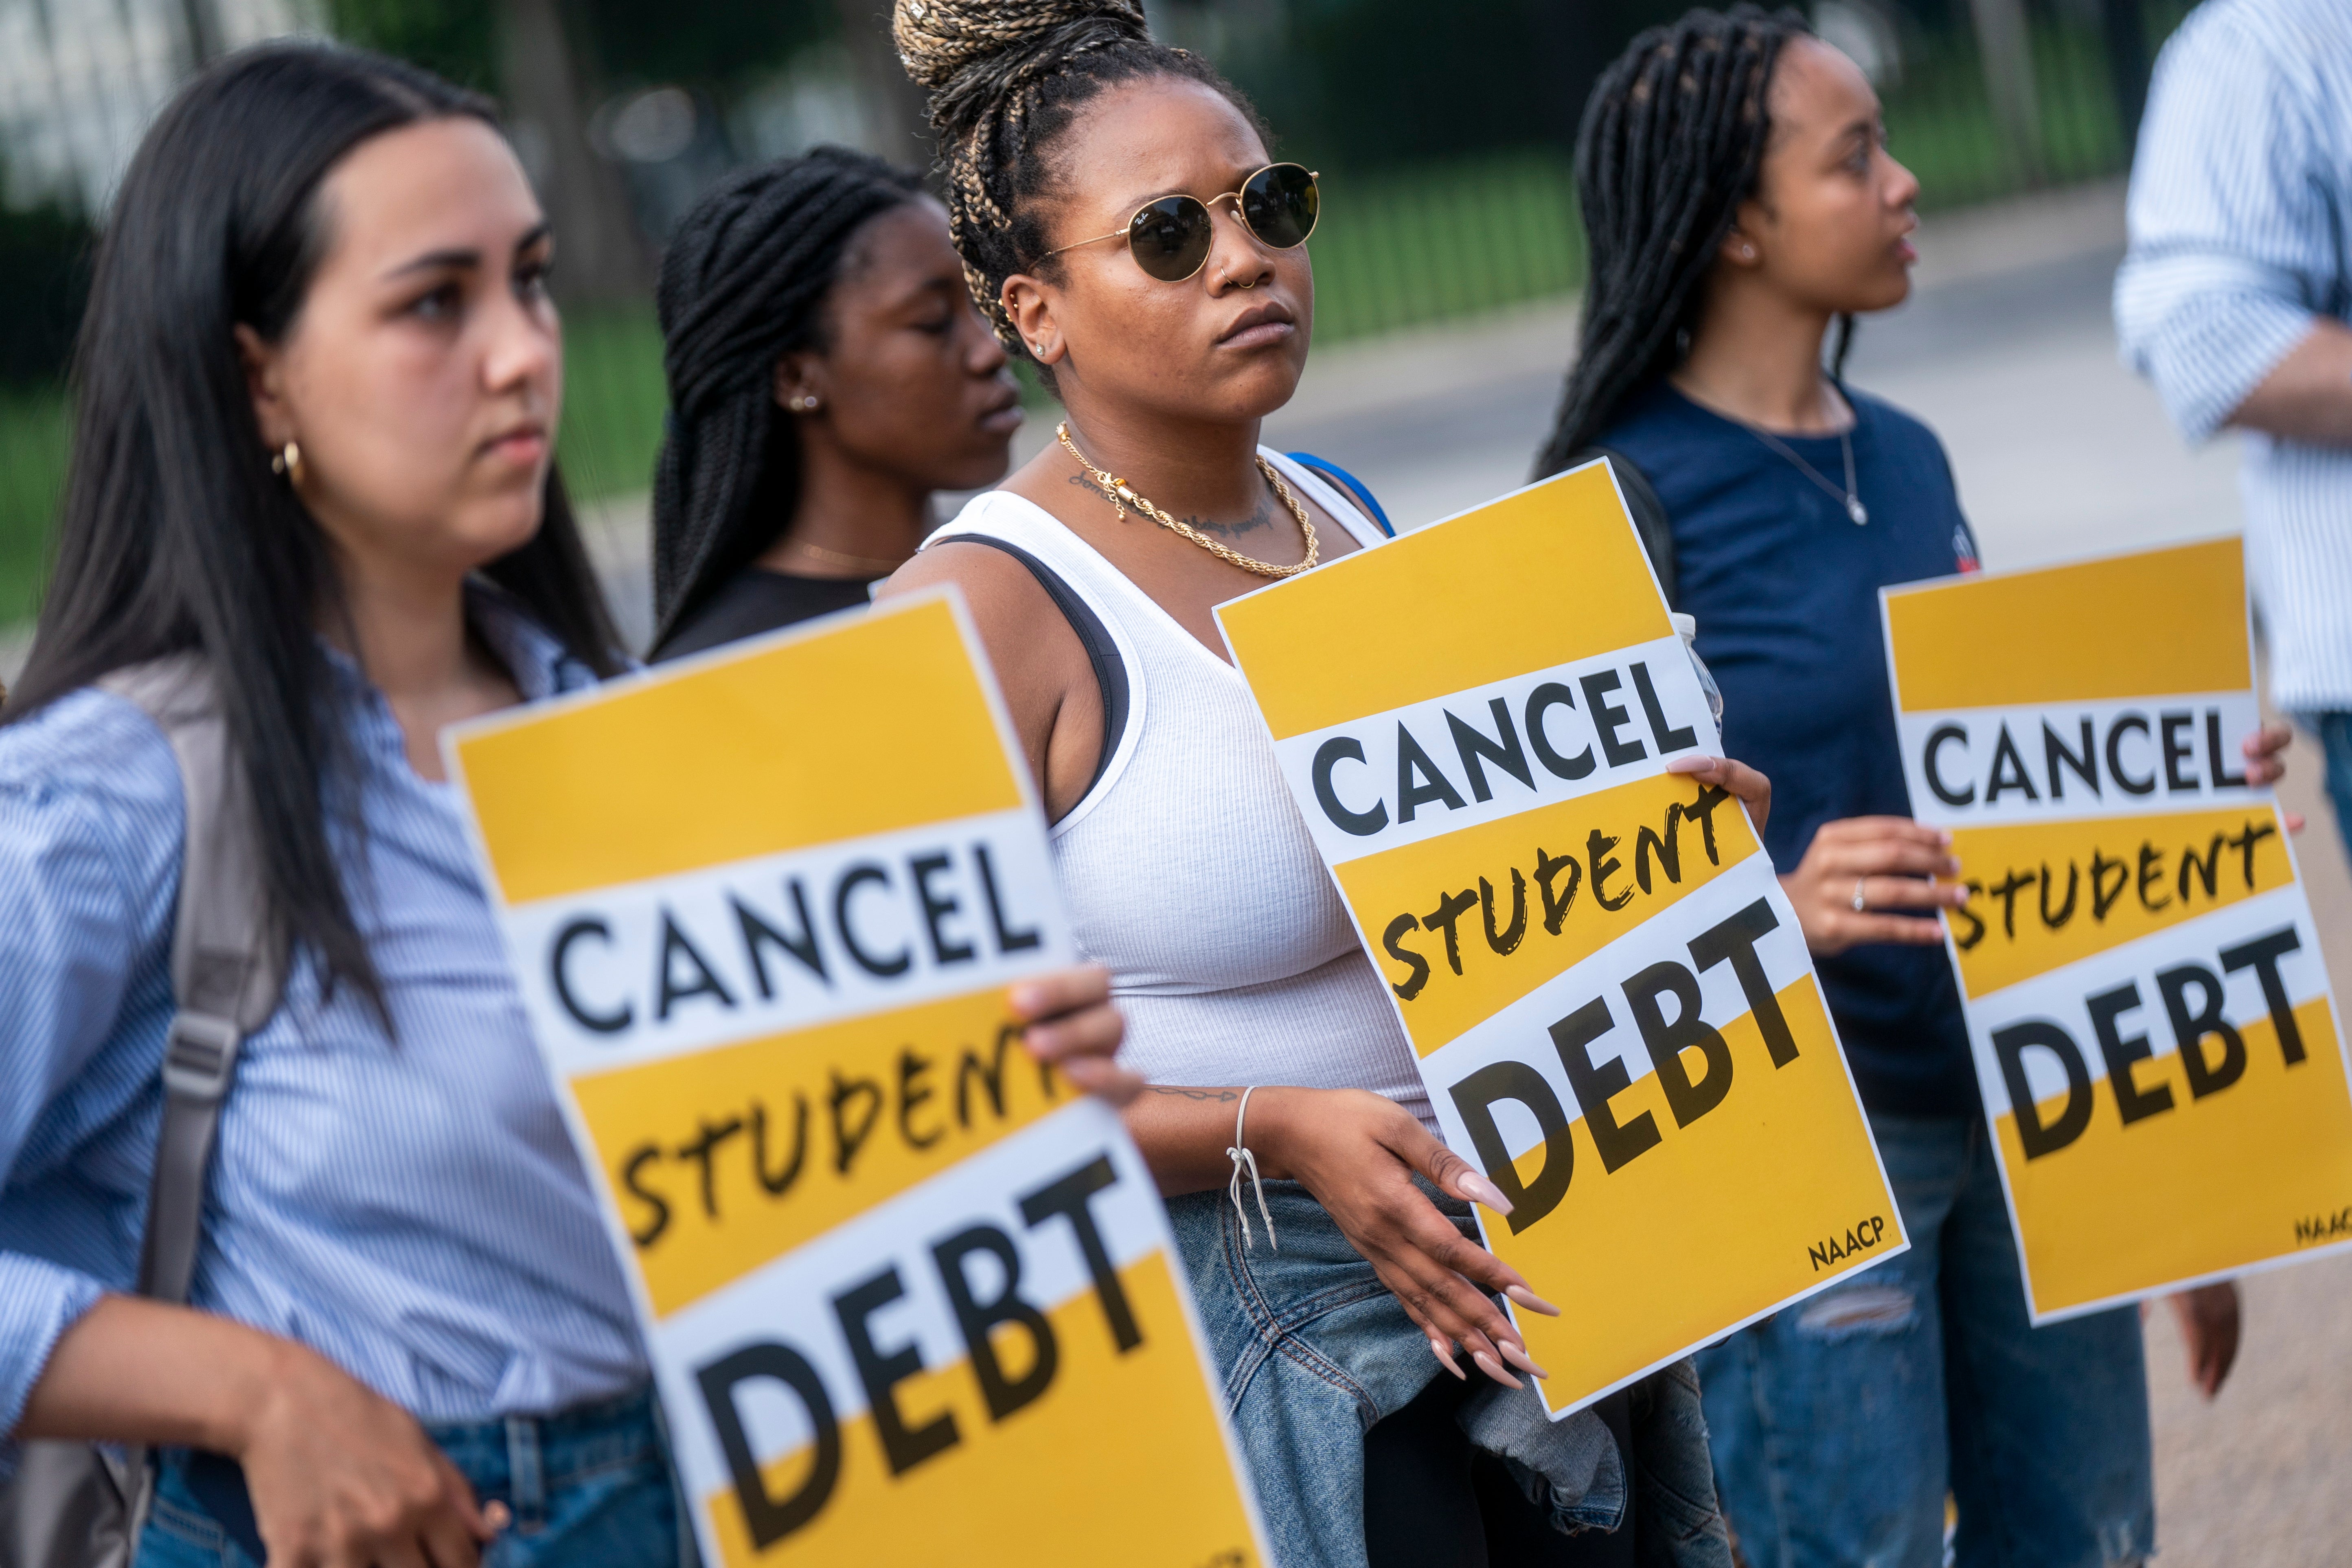 Student loan debt advocates rally in Washington DC following the Biden administration’s plan to cancel some federal student loan debt on 25 August